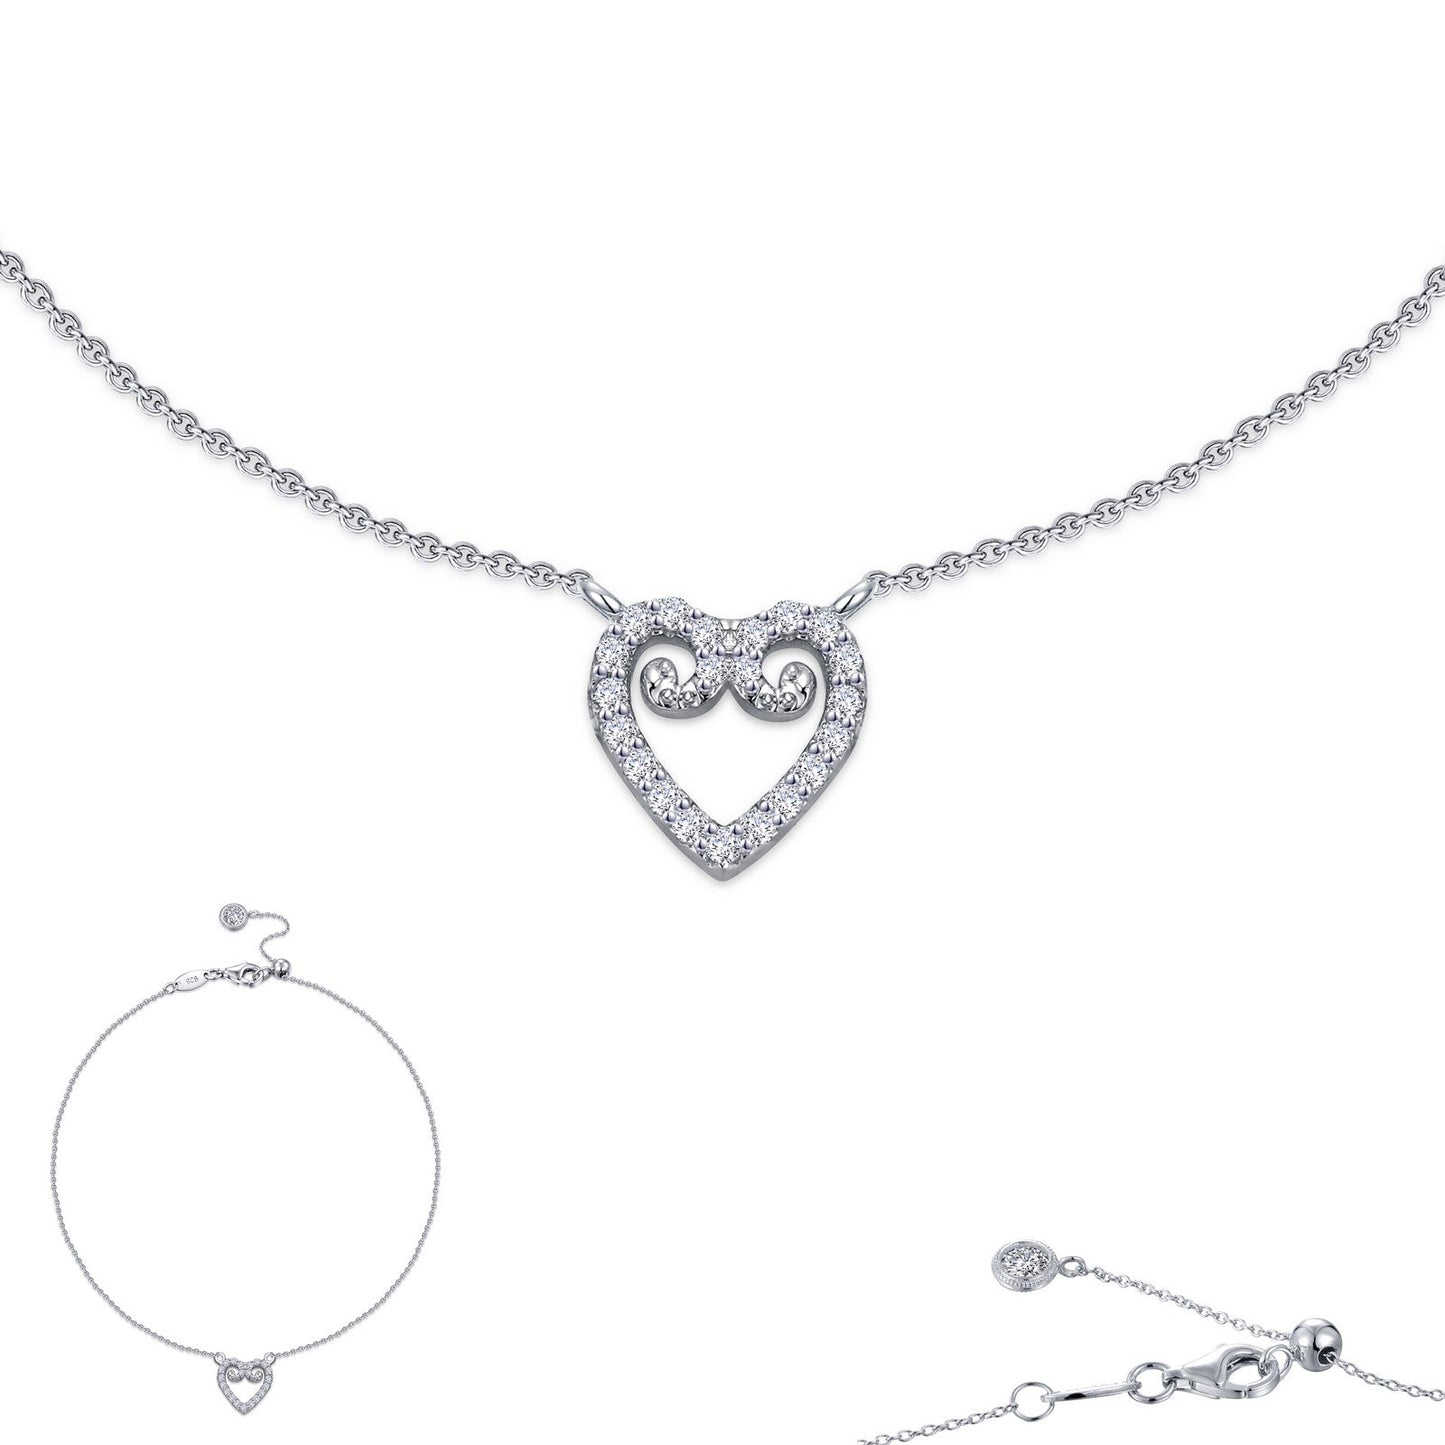 Lafonn Mini Open Heart Anklet Simulated Diamond ANKLETS Platinum 0.46 CTS Approx. 8.3mm (H) x 8.3mm (W)